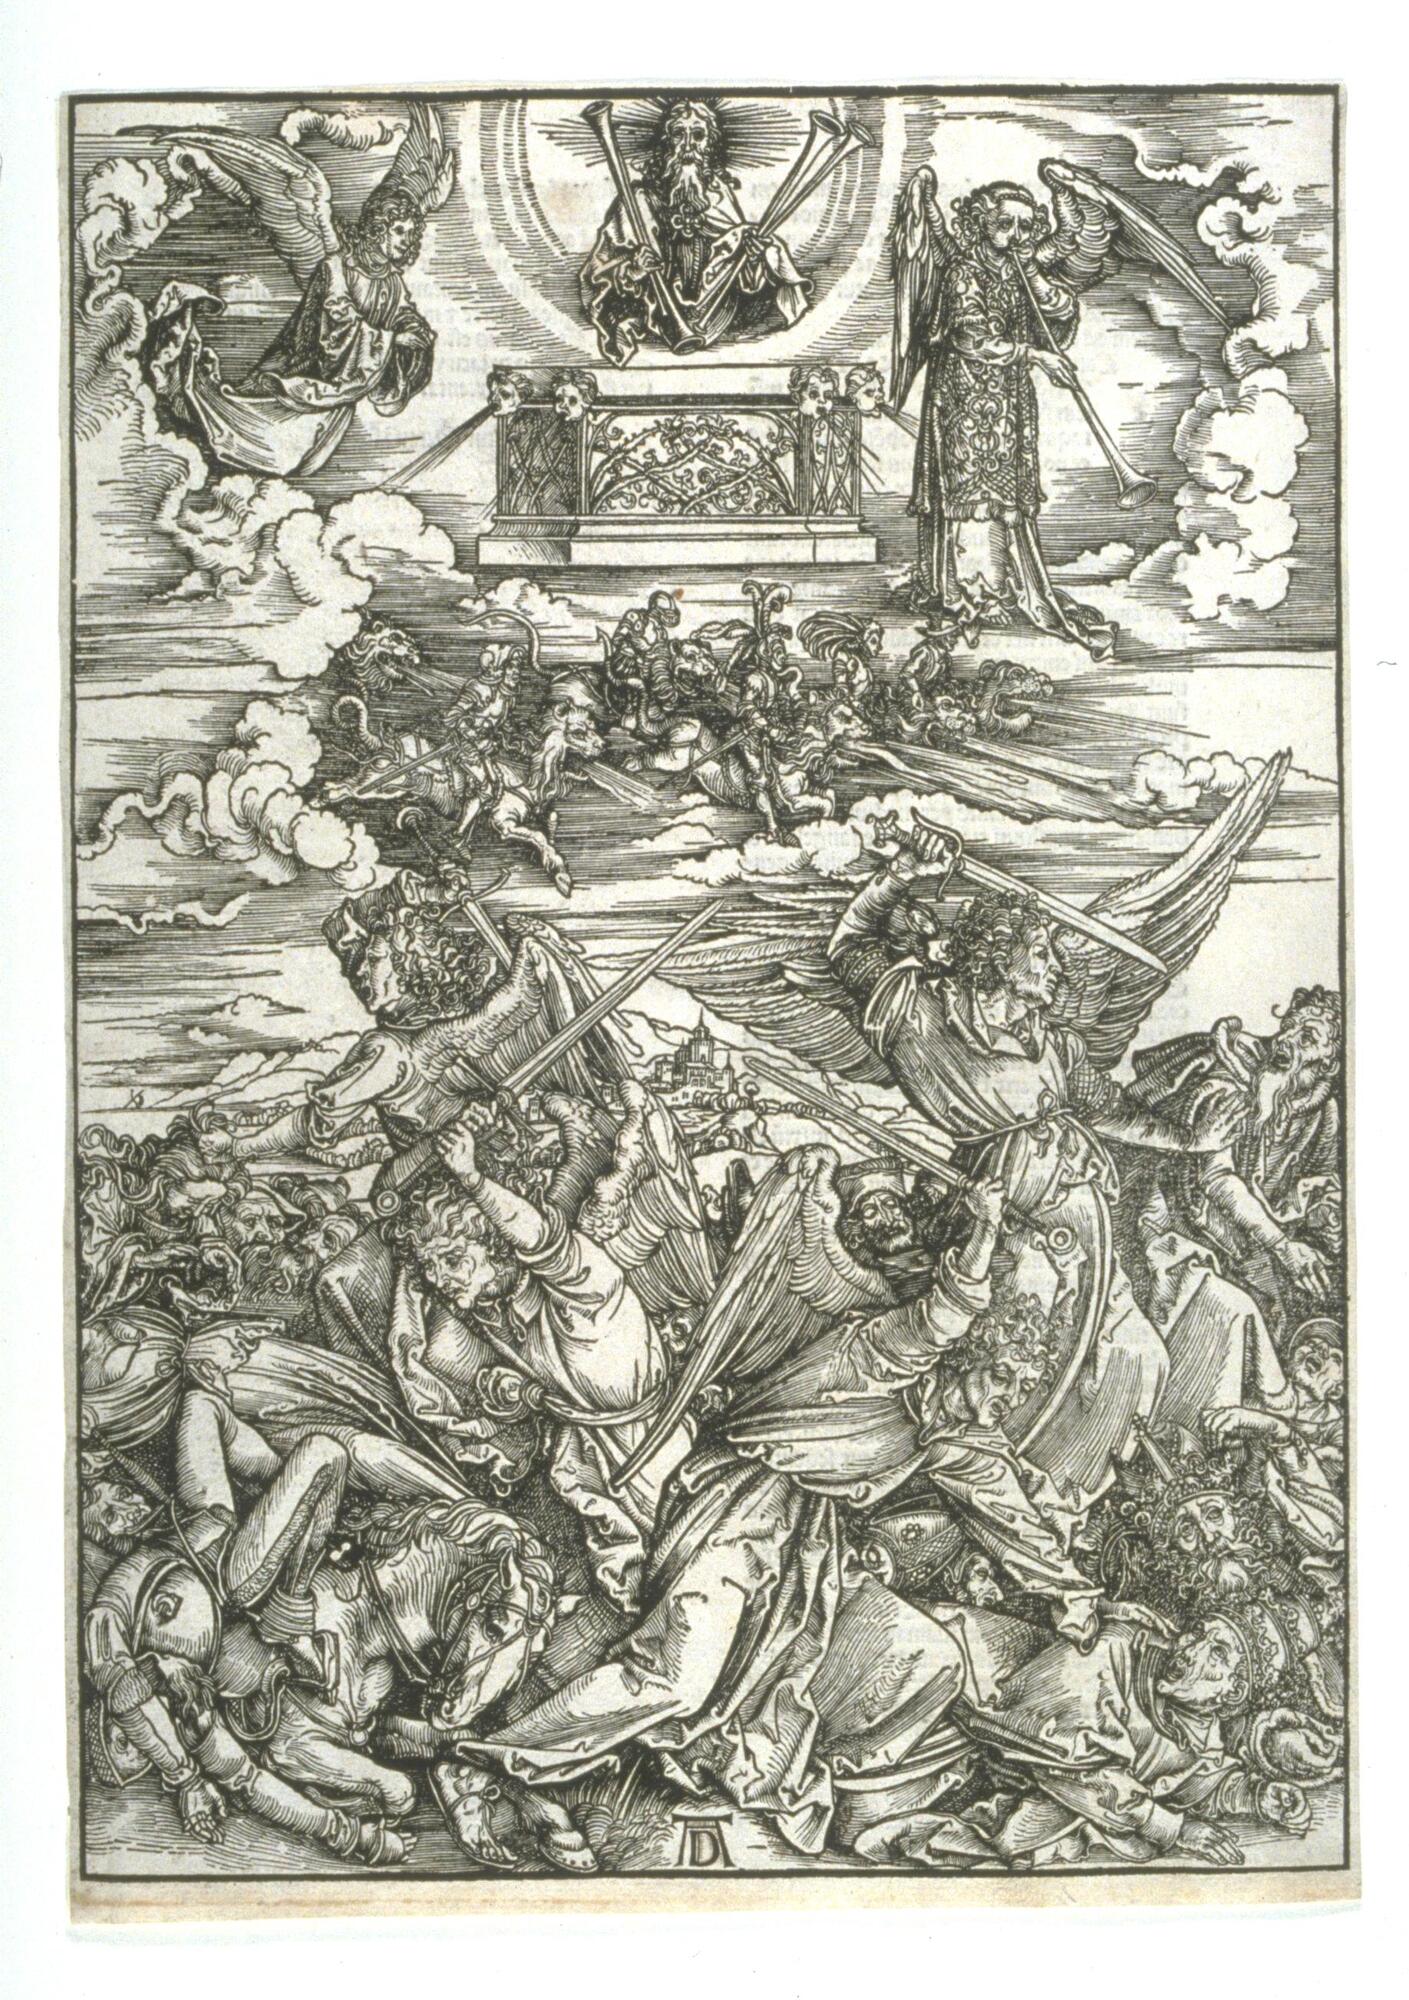 This woodcut print is vertically oriented. The upper half of the piece is celestial with an angel standing on a cloud blowing a trumpet. Men on fire-breathing beasts exit from the clouds. At the very top center, a white-bearded figure, shown from the torso to the head, holds four trumpets. Rays emanate from his head to form a halo, and he is framed in a half circle. Directly below him is an altar with vines on the sides and four child-faces spitting water out. The upper right corner features an angel blowing a trumpet and the upper left features a smiling angel with hands clasped in prayer. The lower half of the print is terrestrial and depicts a chaotic battle scene. Four angels with wings and swords attack a crowd of men, including a pope, a bishop and a king, as well as commoners. These figures are all crowded into the foreground with contorted postures. There is a city on a hill visible in the distance. The center bottom has D&uuml;rer&rsquo;s signature of letter &quot;D&quot; contained within a letter &q